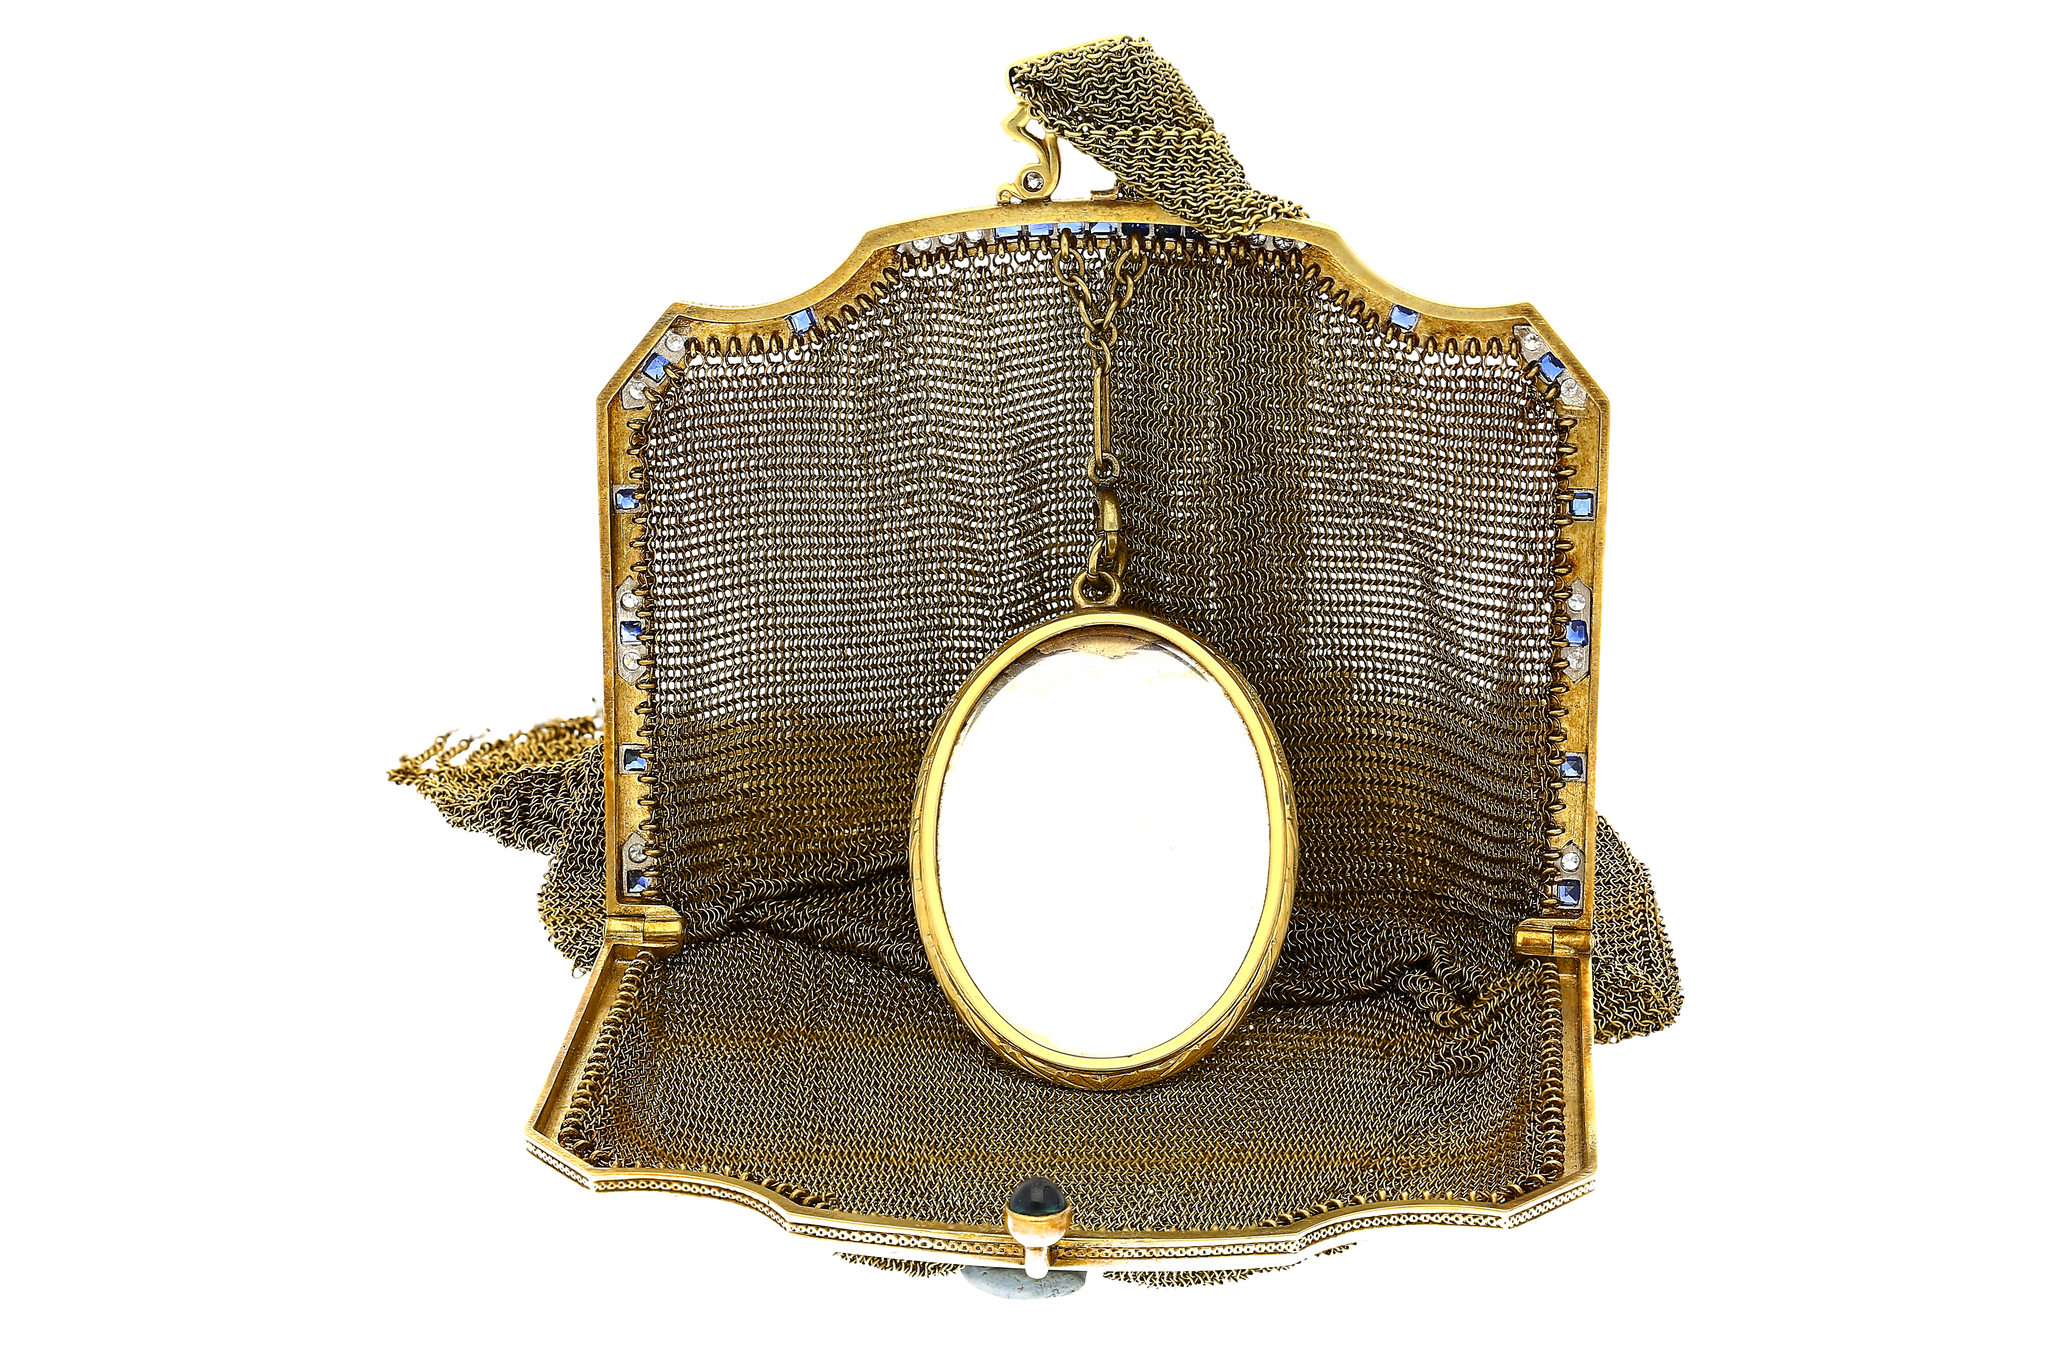 Antique Art Deco Evening Bag In 14k Gold, Platinum, Diamonds and Sapphires With Compact Mirror